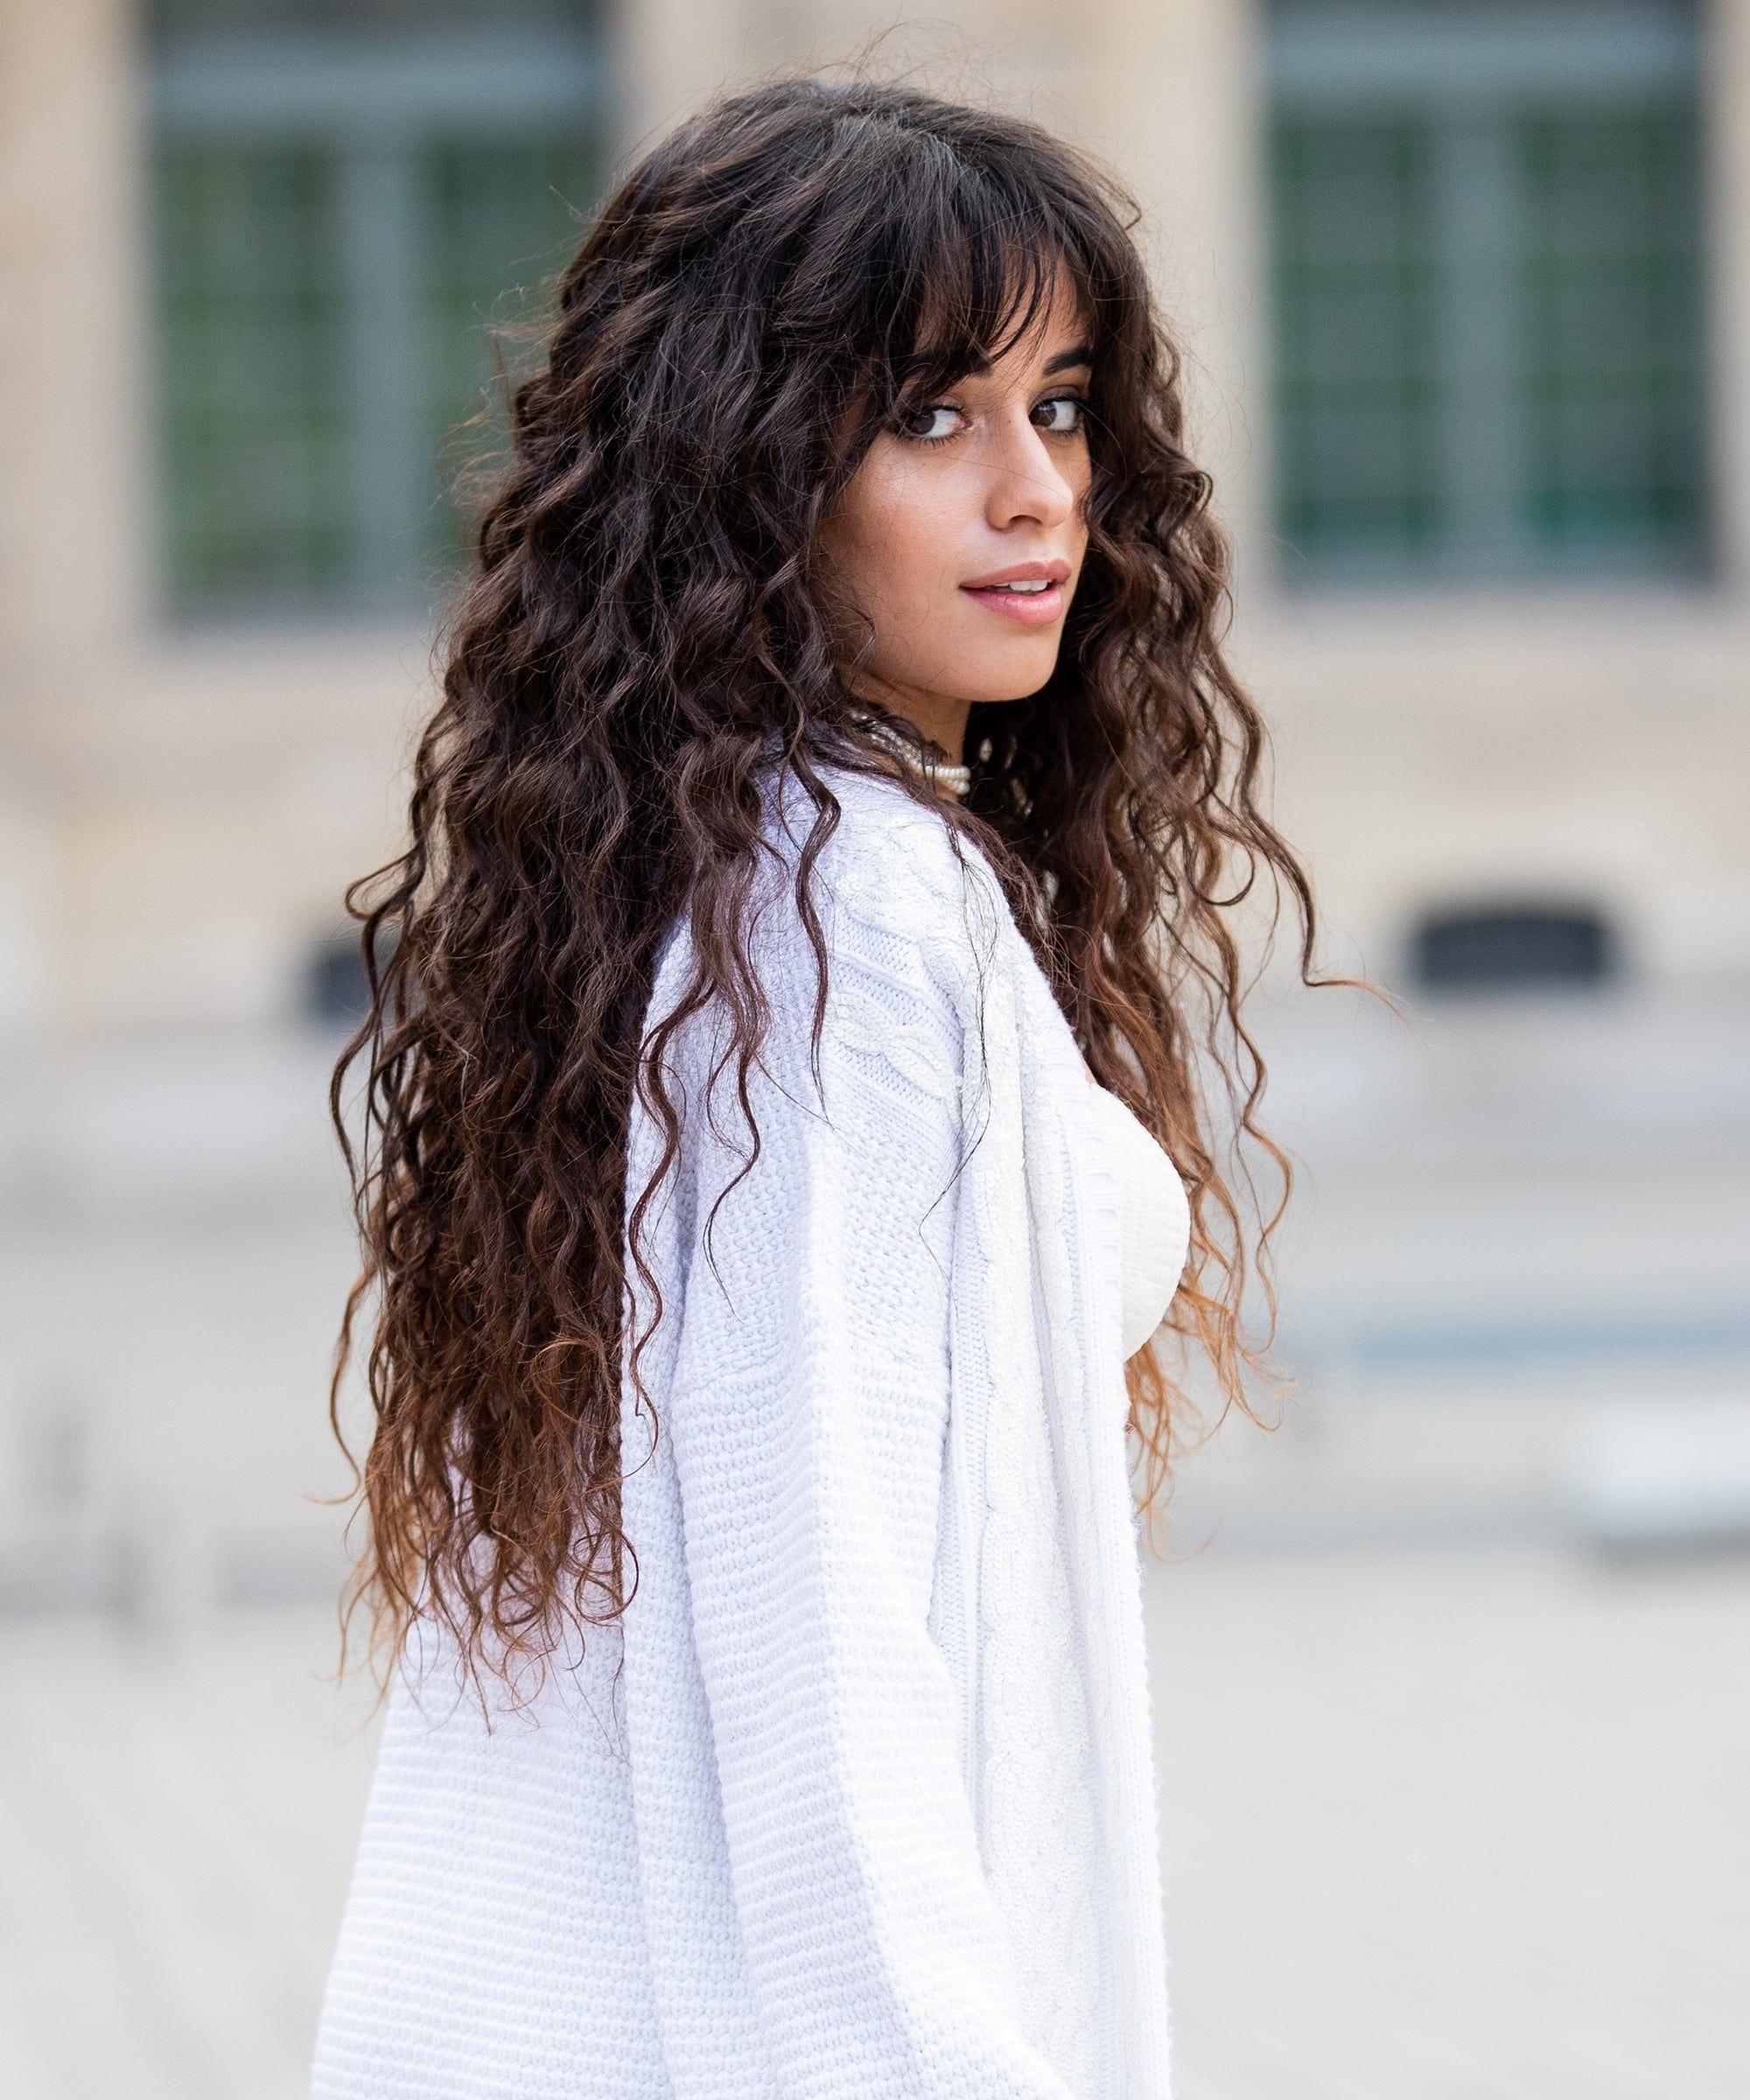 Camila Cabello Reveals Secret To Her Natural Curly Hair With Regard To Most Recent Slightly Curly Hair With Bangs (View 11 of 18)